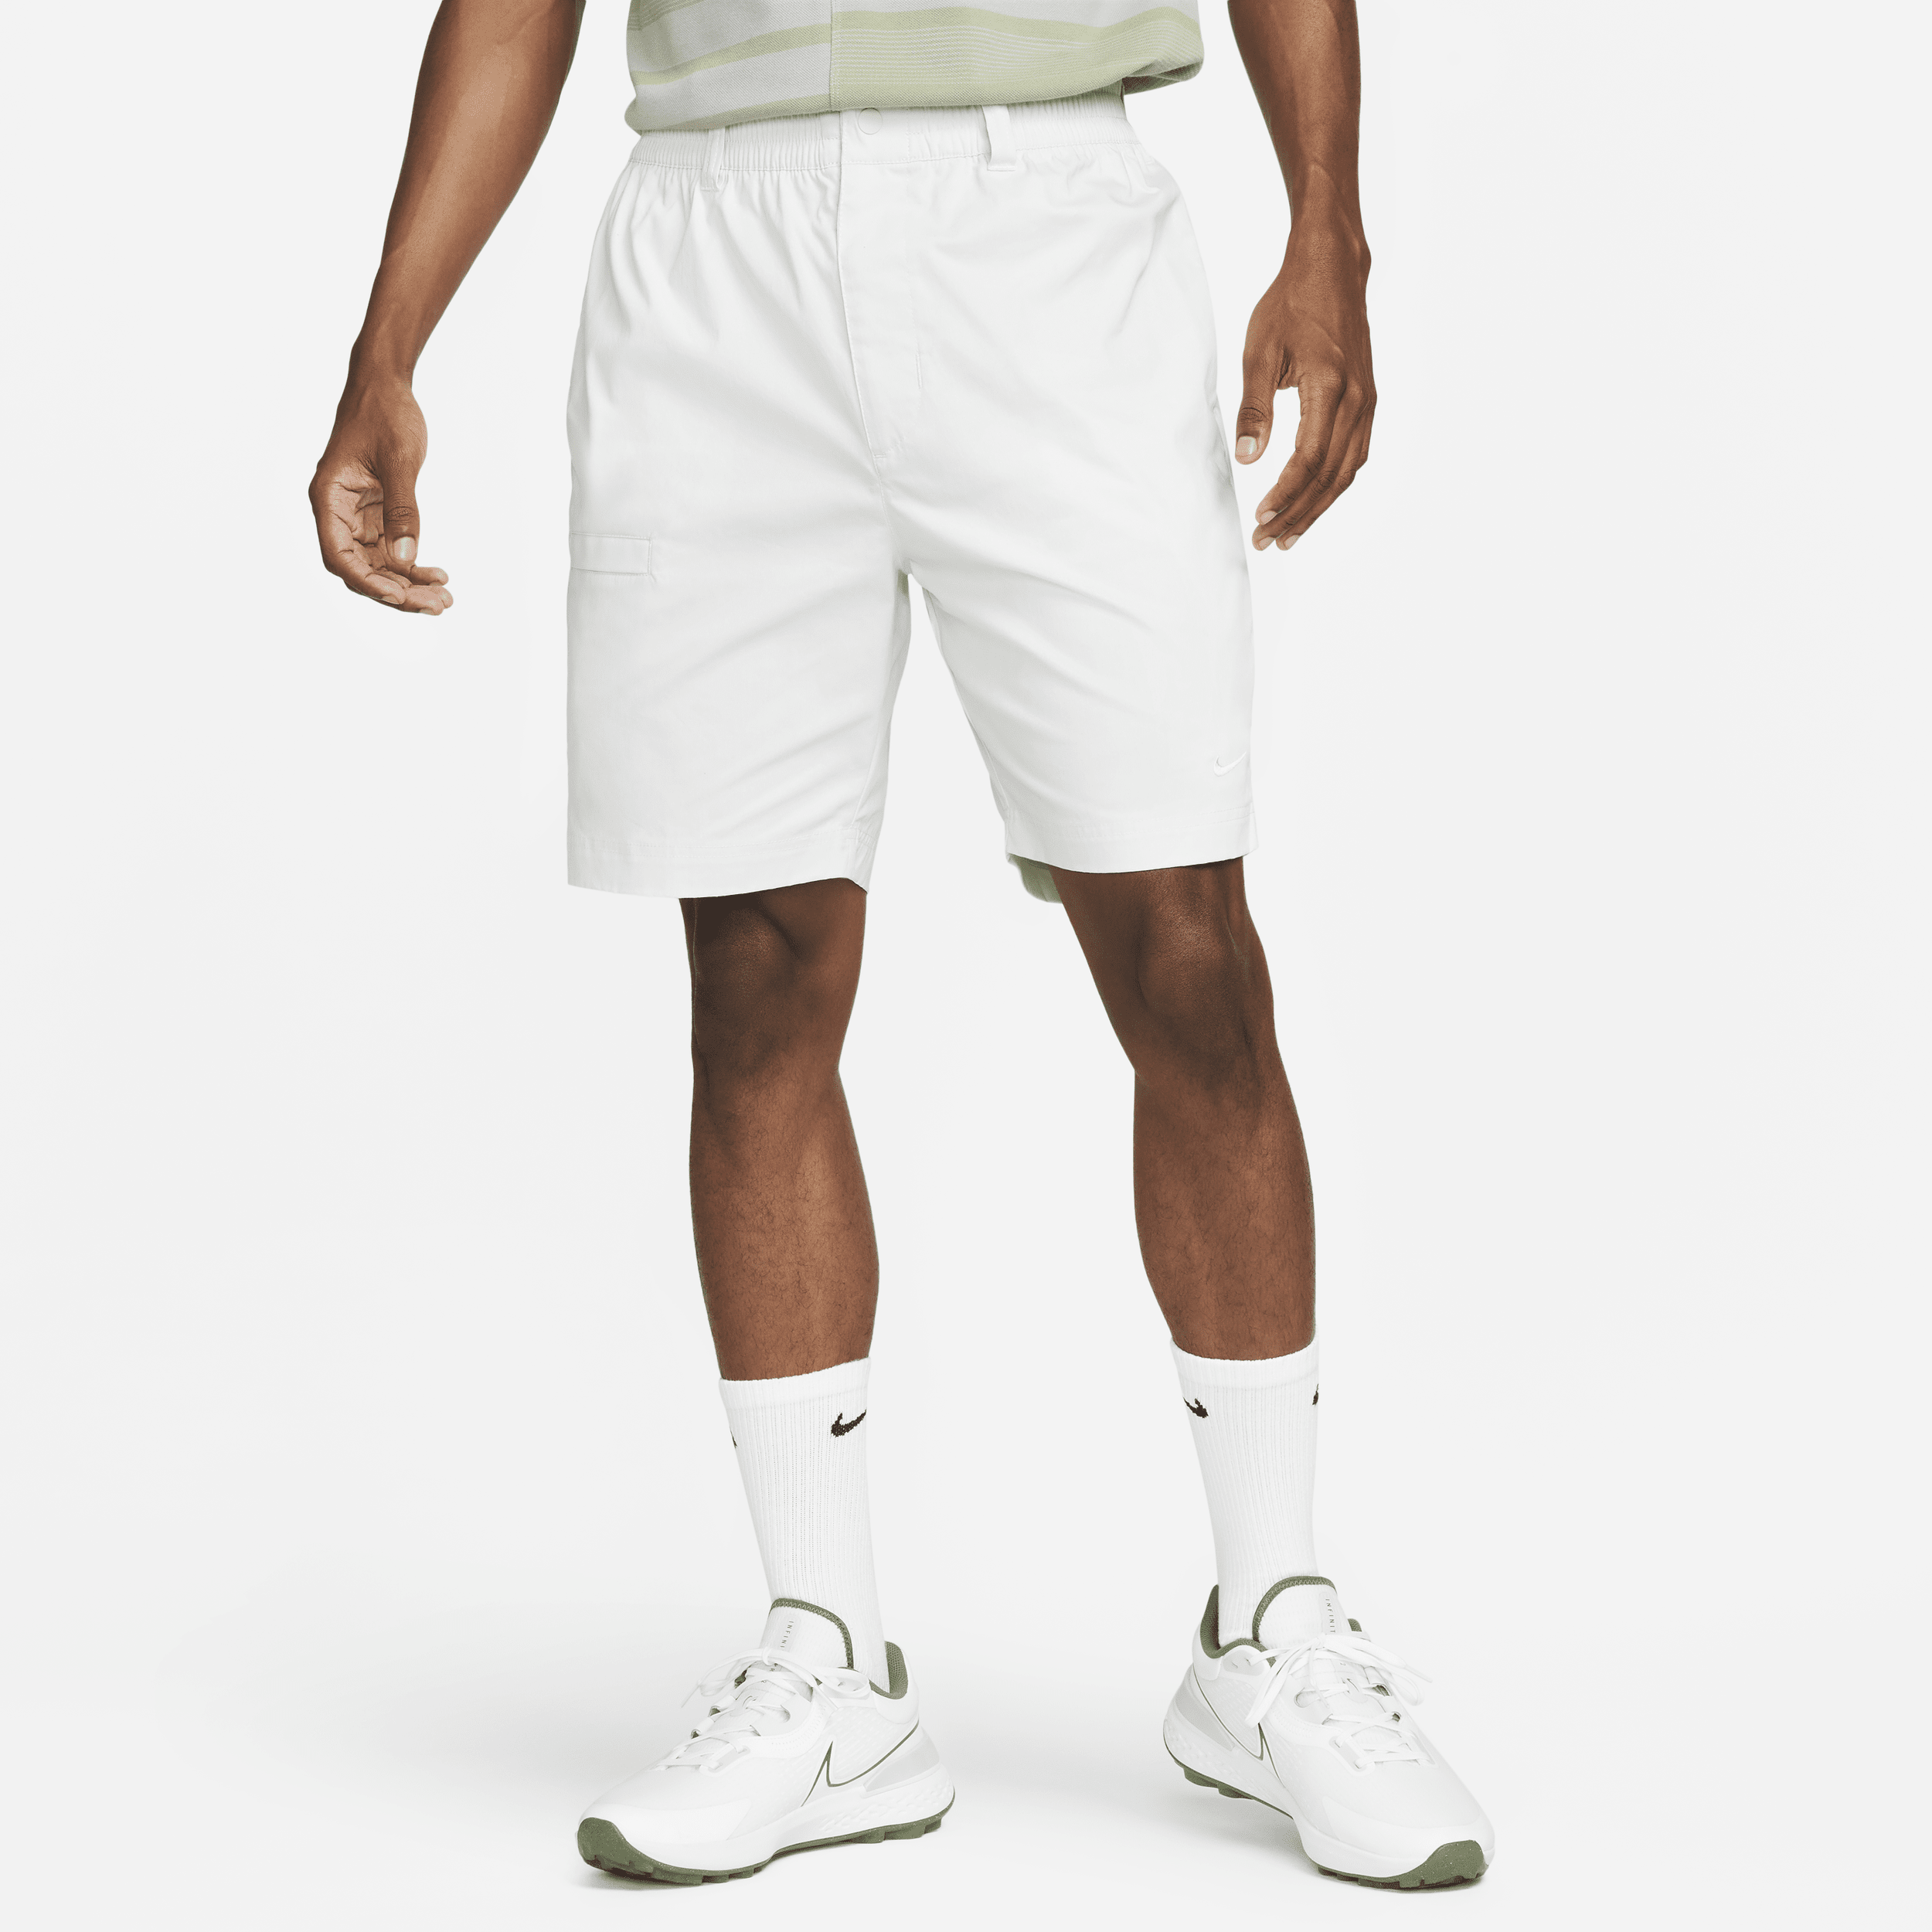 NIKE MEN'S UNSCRIPTED GOLF SHORTS,1009707811